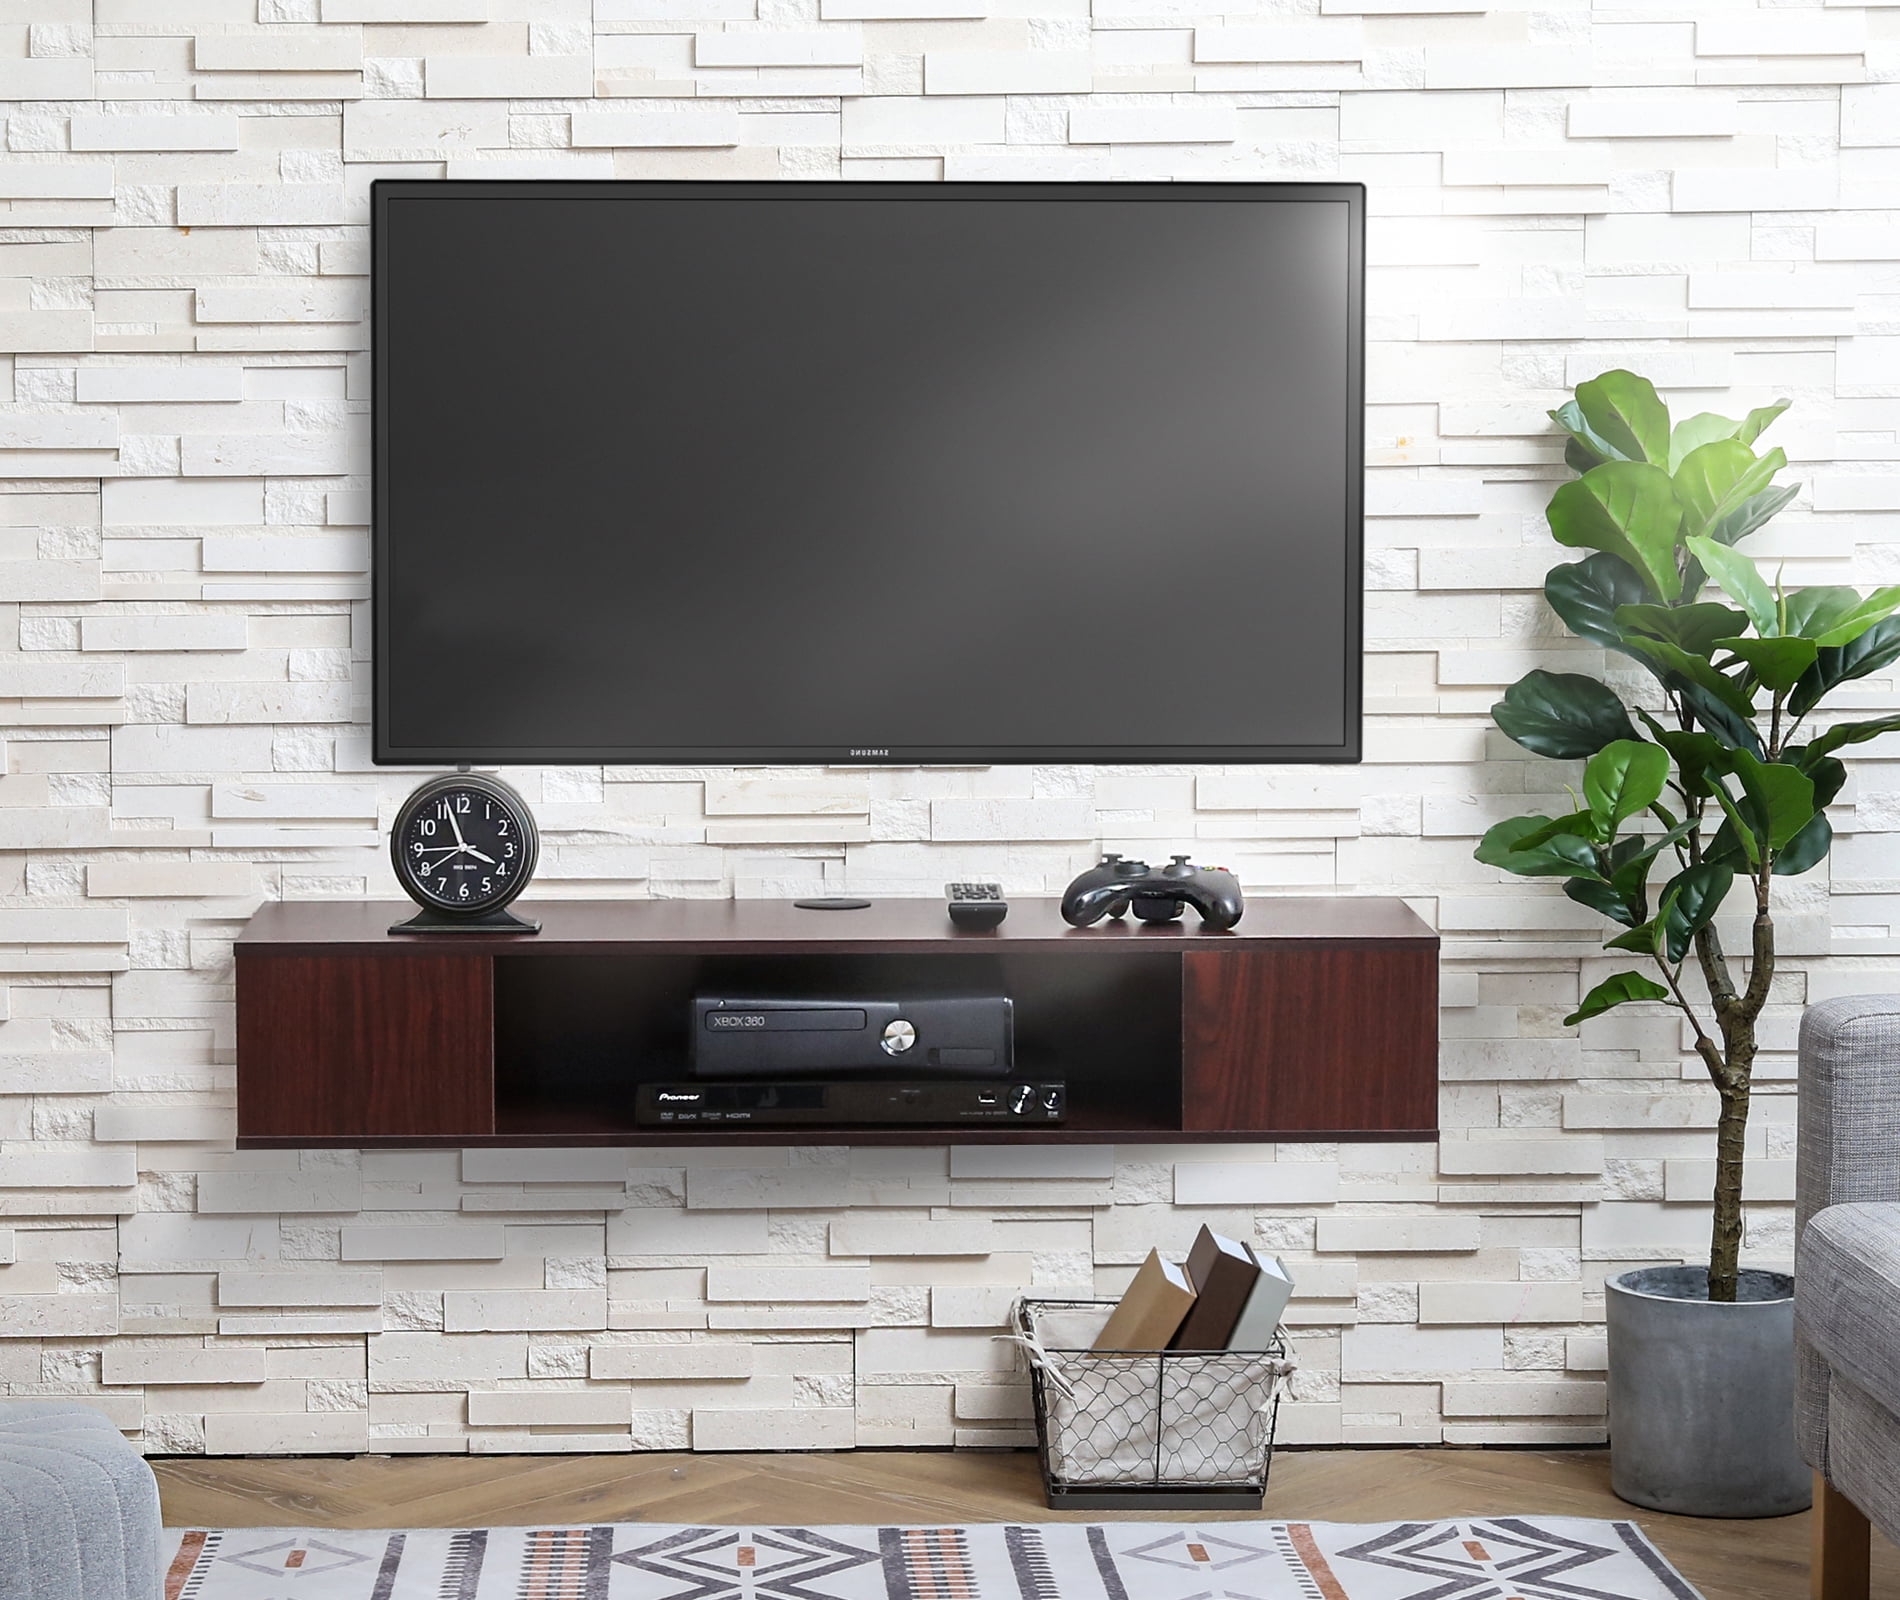 Wall Mounted Media Console Floating Tv Stand Component Shelf For Sale ...